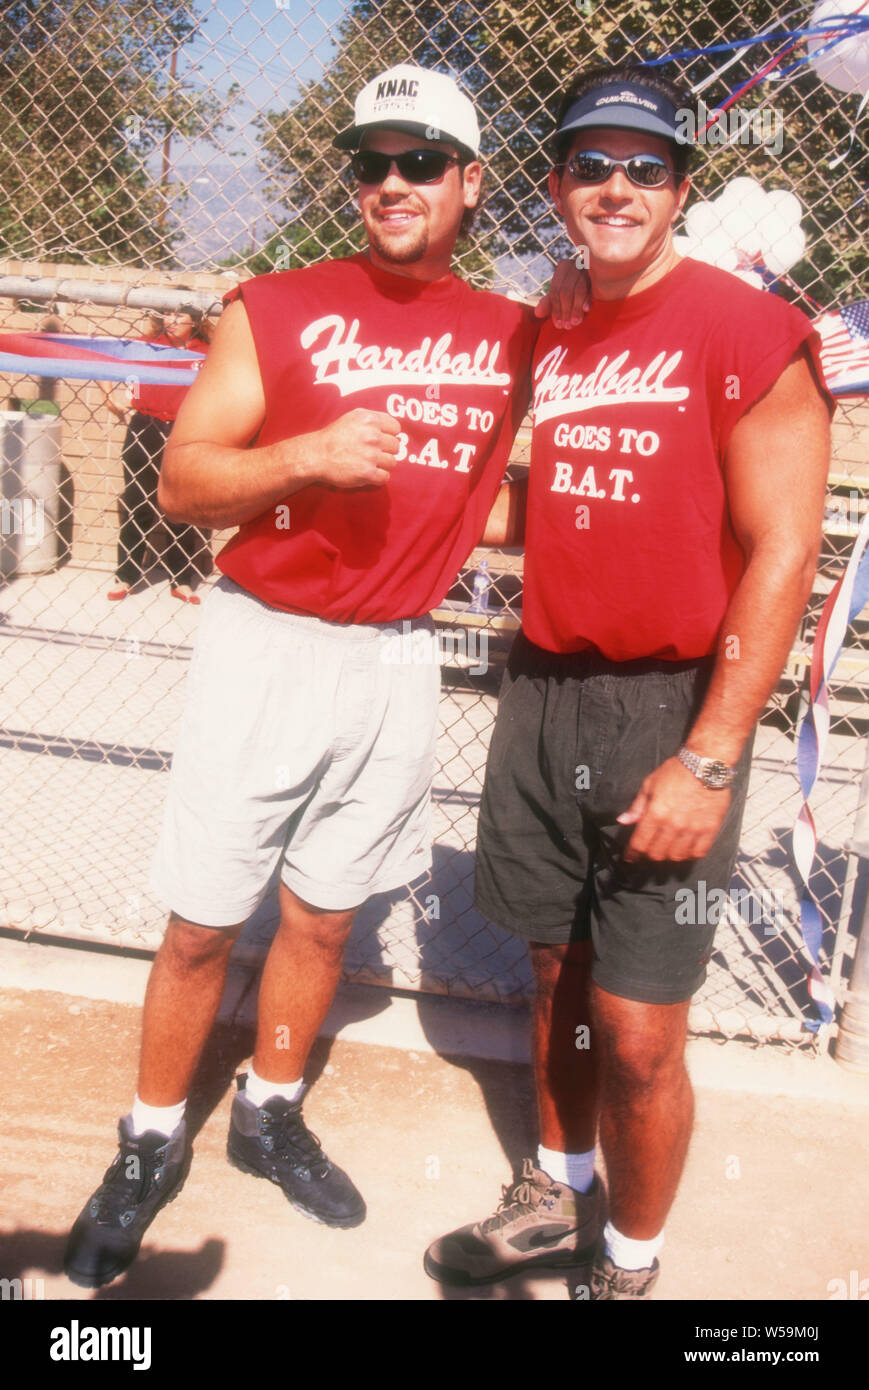 Los Angeles, California, USA 12th October 1994 Professional baseball  players Mike Piazza and Eric Karros of the Dodgers attend Hardball Goes To  B.A.T. baseball game on October 12, 1994 in Los Angeles